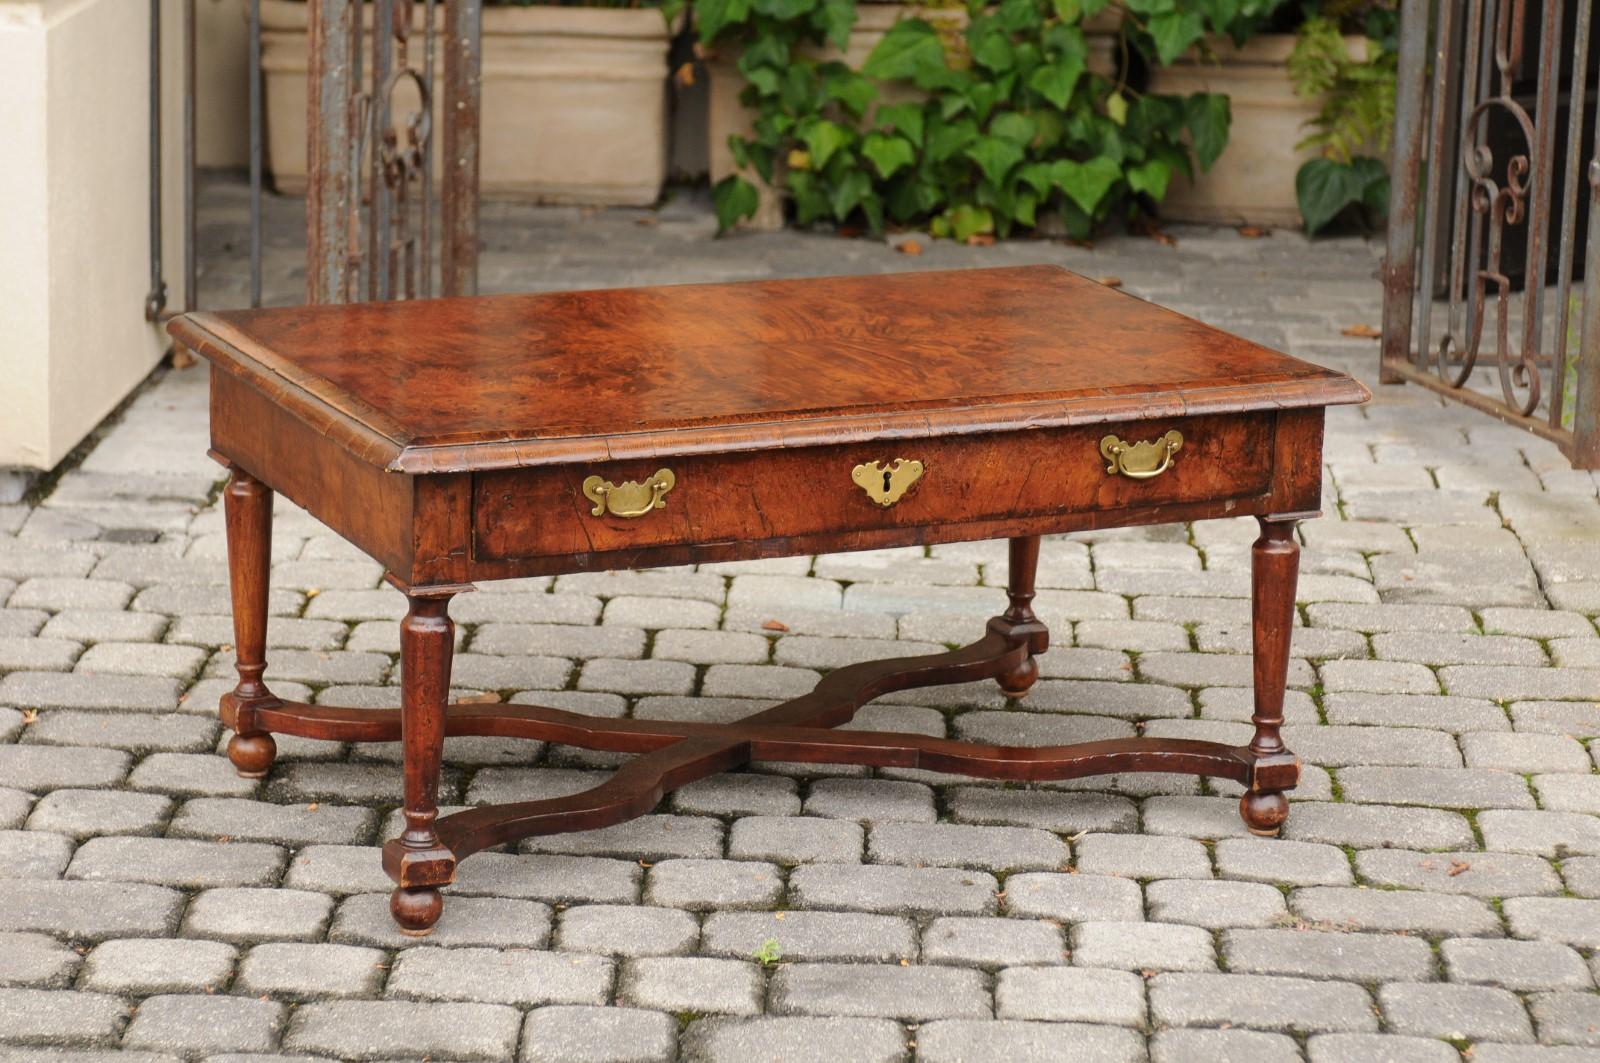 A French burl walnut coffee table from the late 19th century, with long drawer, turned legs and X-form cross stretcher. Born in the later years of the 19th century, at a time when the Impressionists were roaming the countryside looking for their